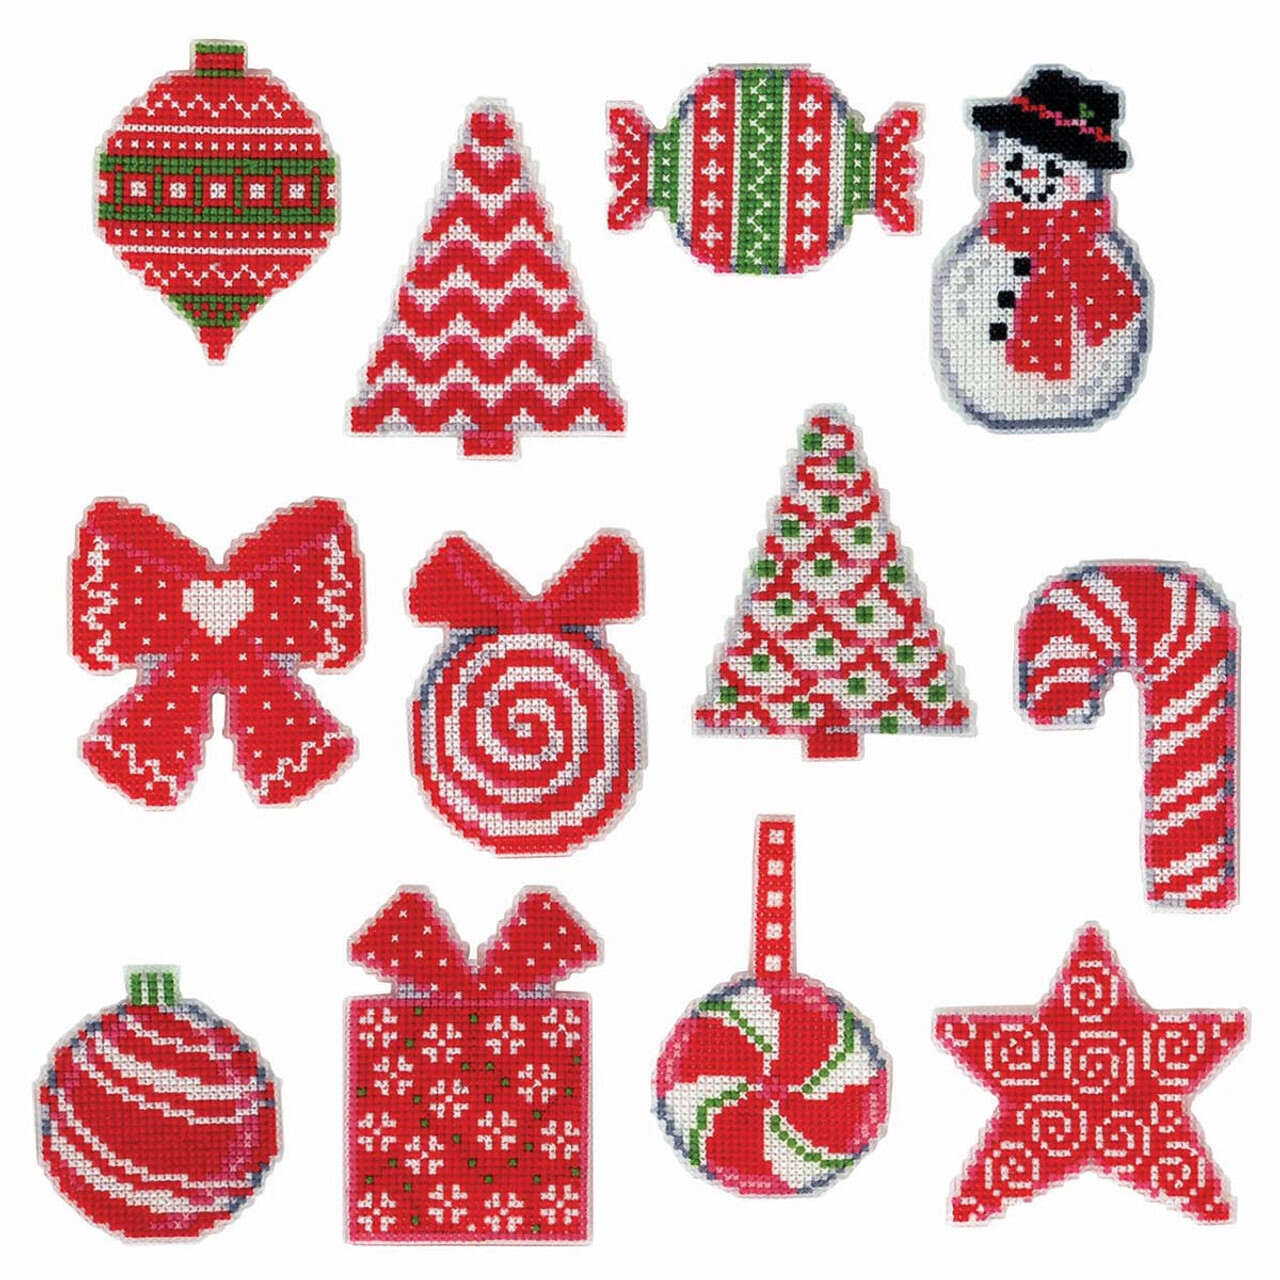 4 Pcs Mini Embroidery Hoops Ornaments Plastic Cross Stitch Daily Use